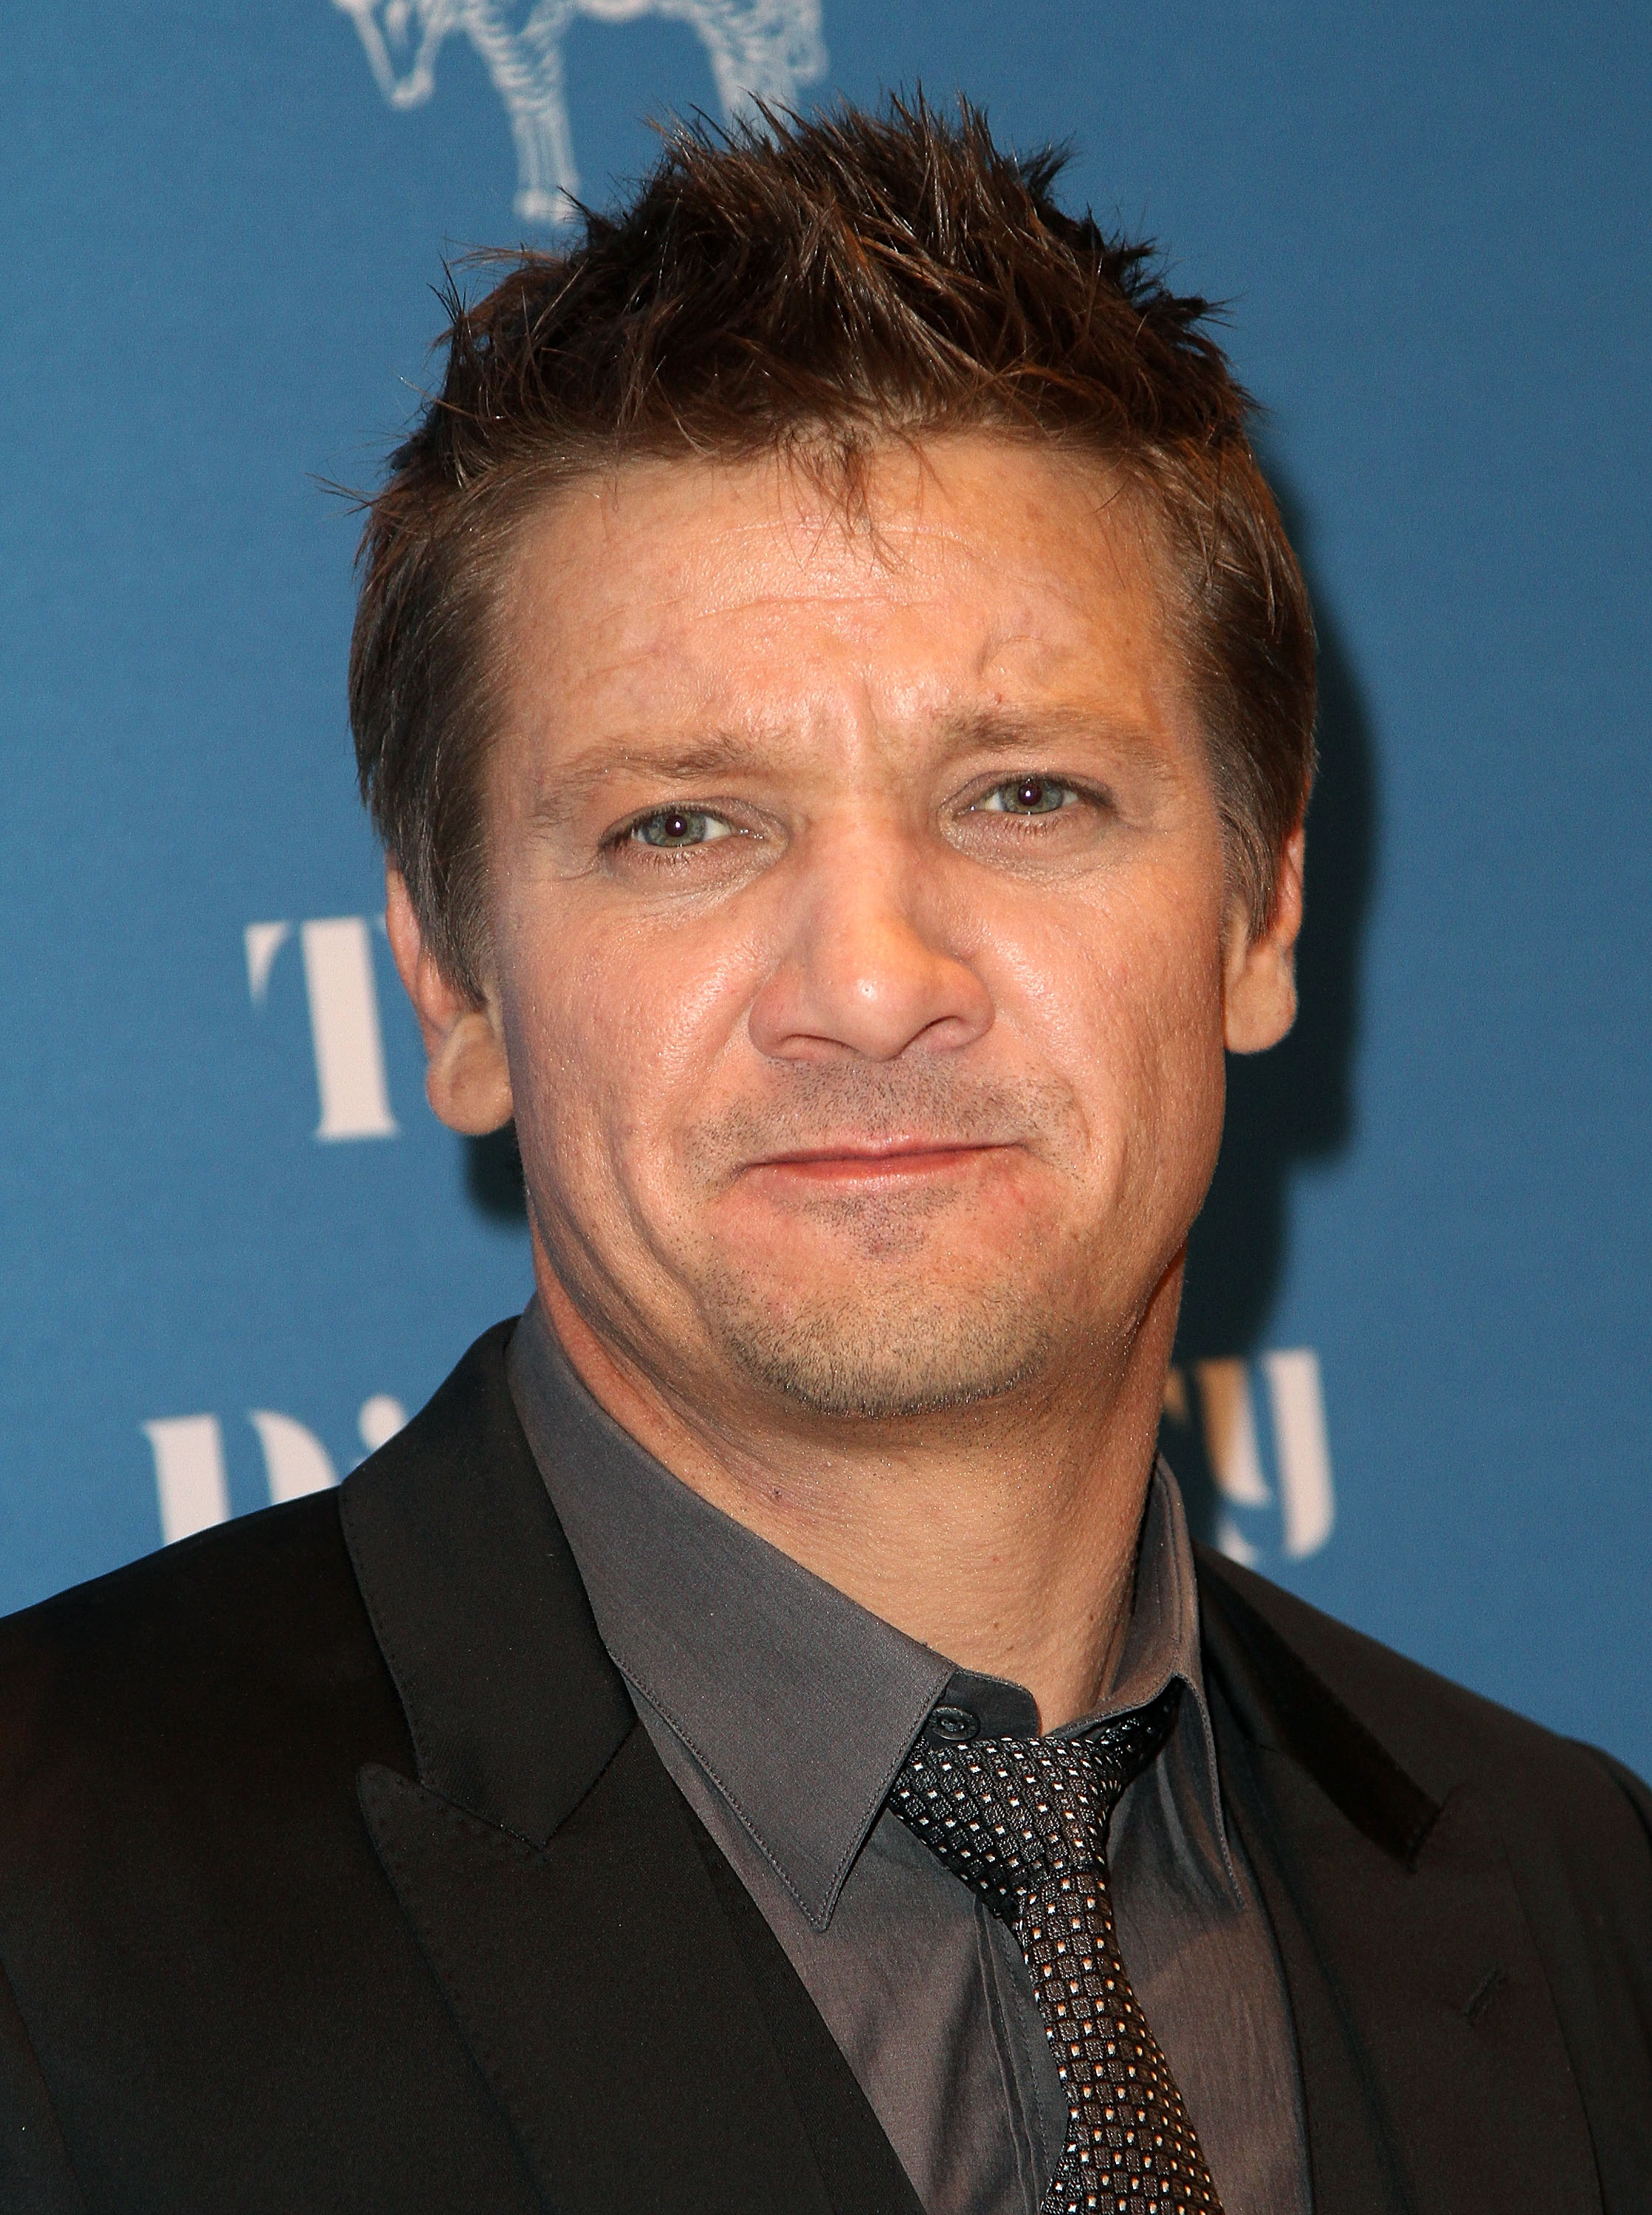 Jeremy Renner at the Launch of Jeff Vespa's new book "The Art Of Discovery" in Beverly Hills, Ca. on Oct. 23, 2014. (Maury Phillips—Getty Images)